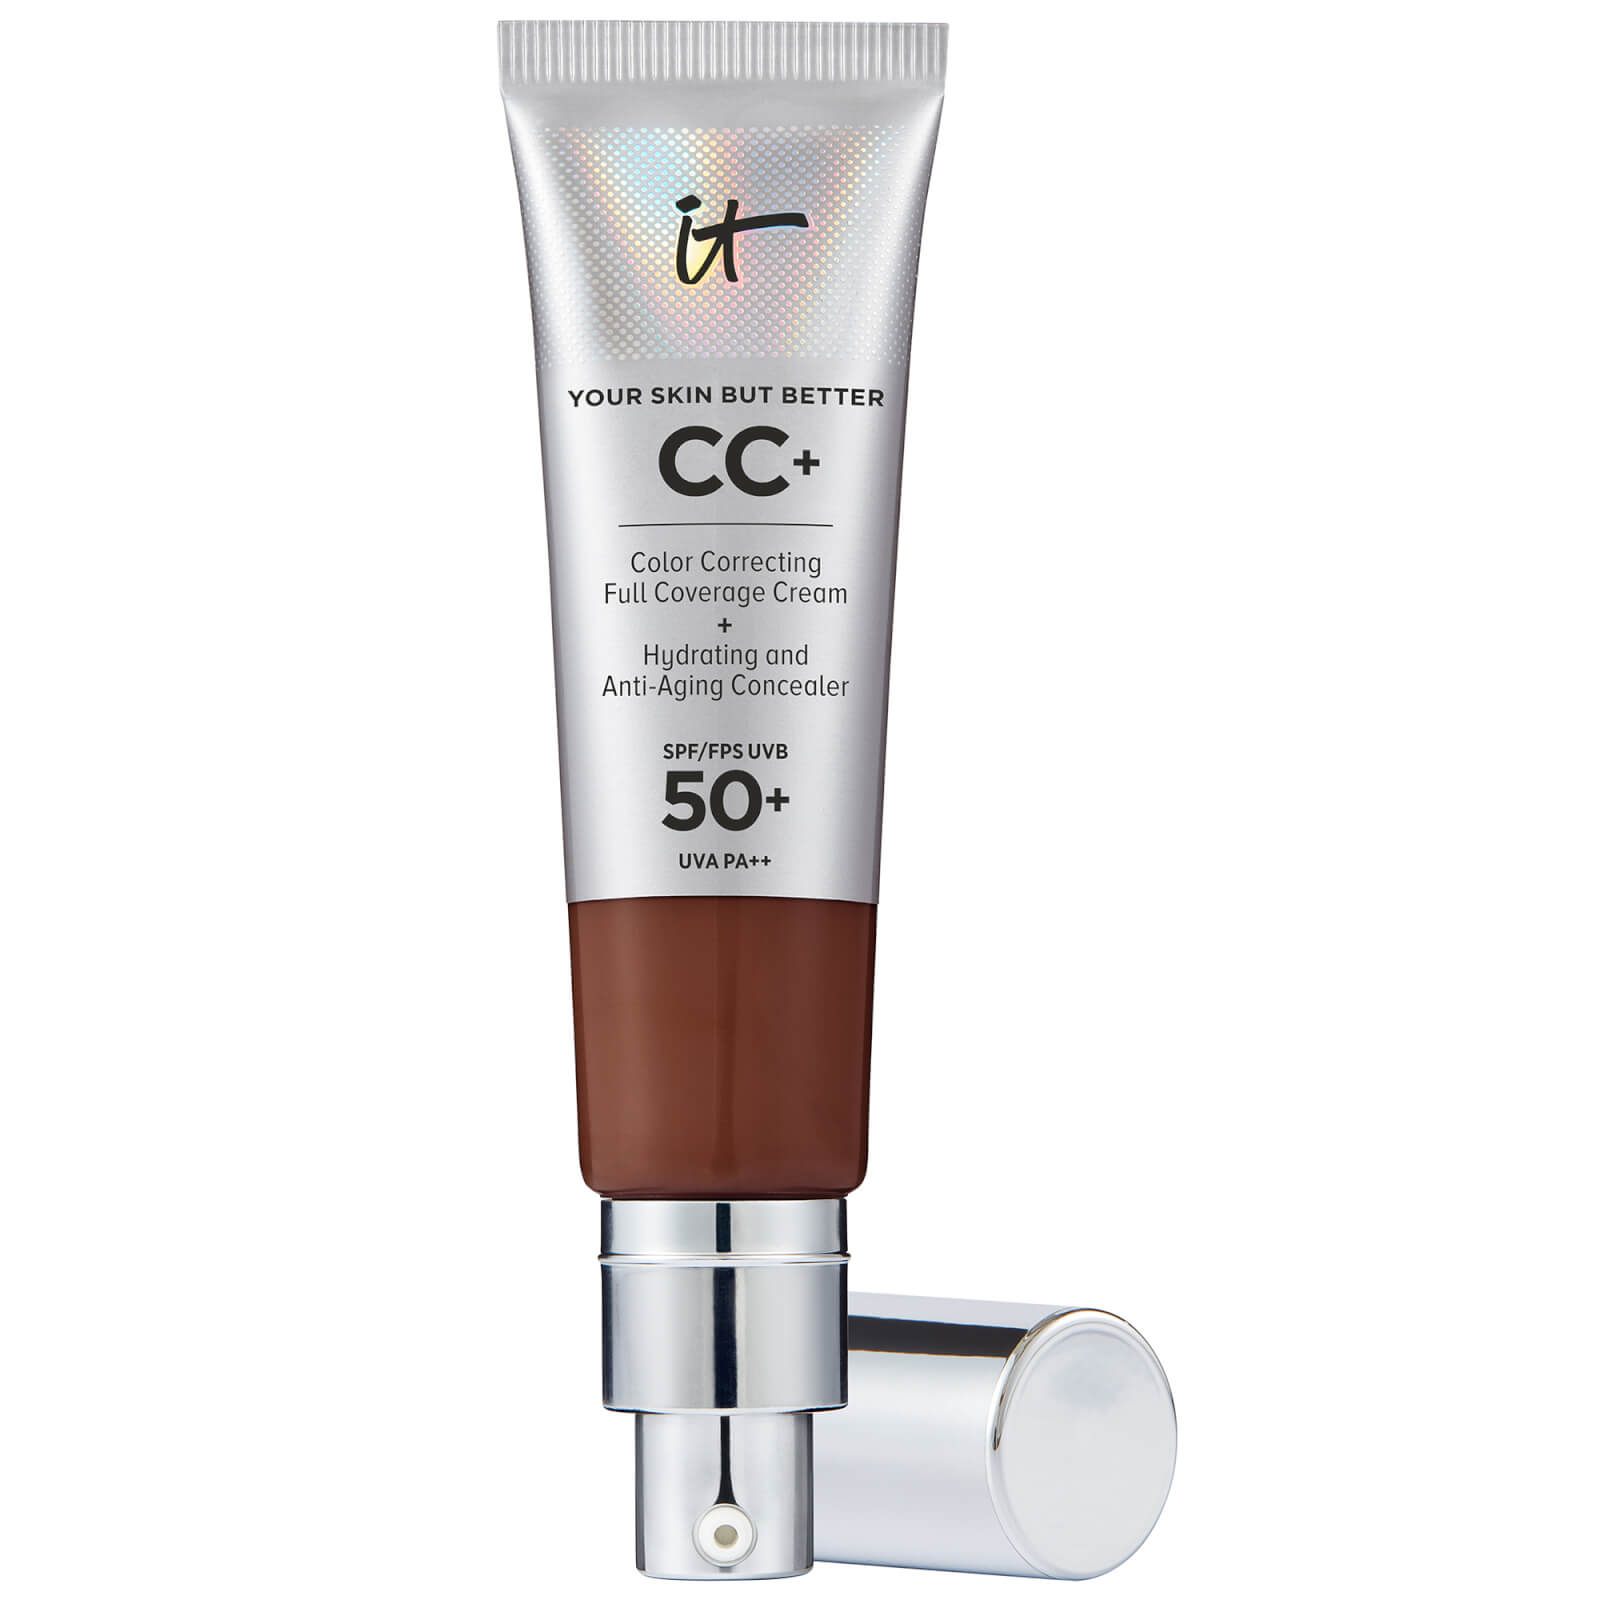 IT Cosmetics Your Skin But Better CC+ Cream with SPF50 32ml (Various Shades) - Deep Bronze